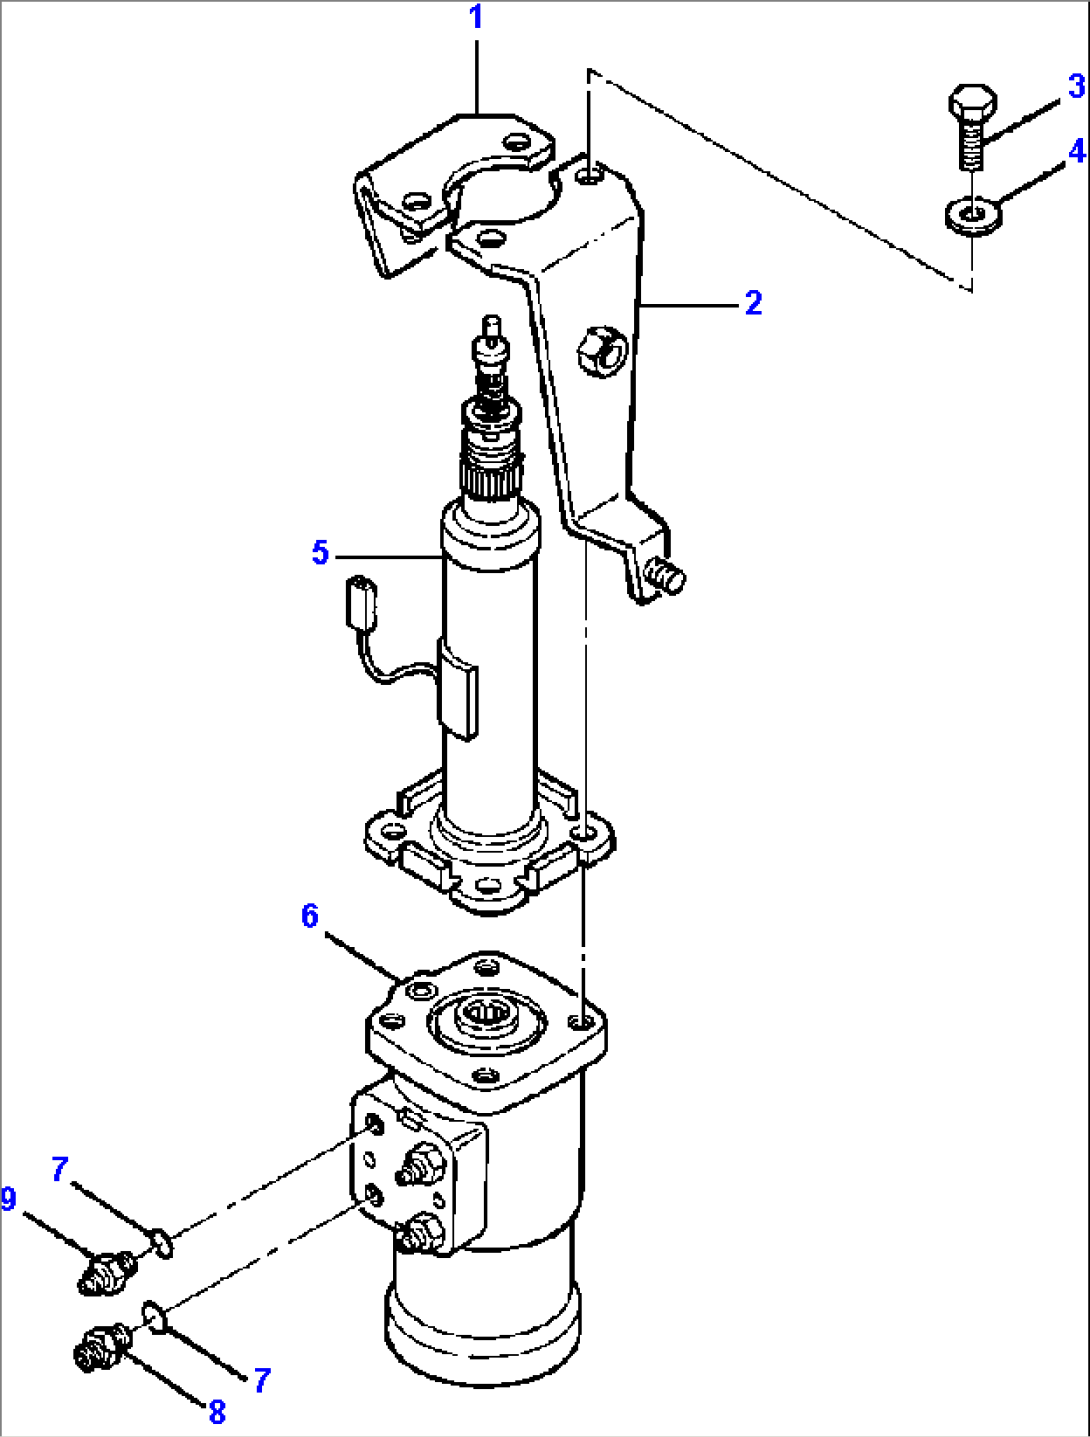 FIG. K5410-01A2 STEERING CONTROL ASSEMBLY